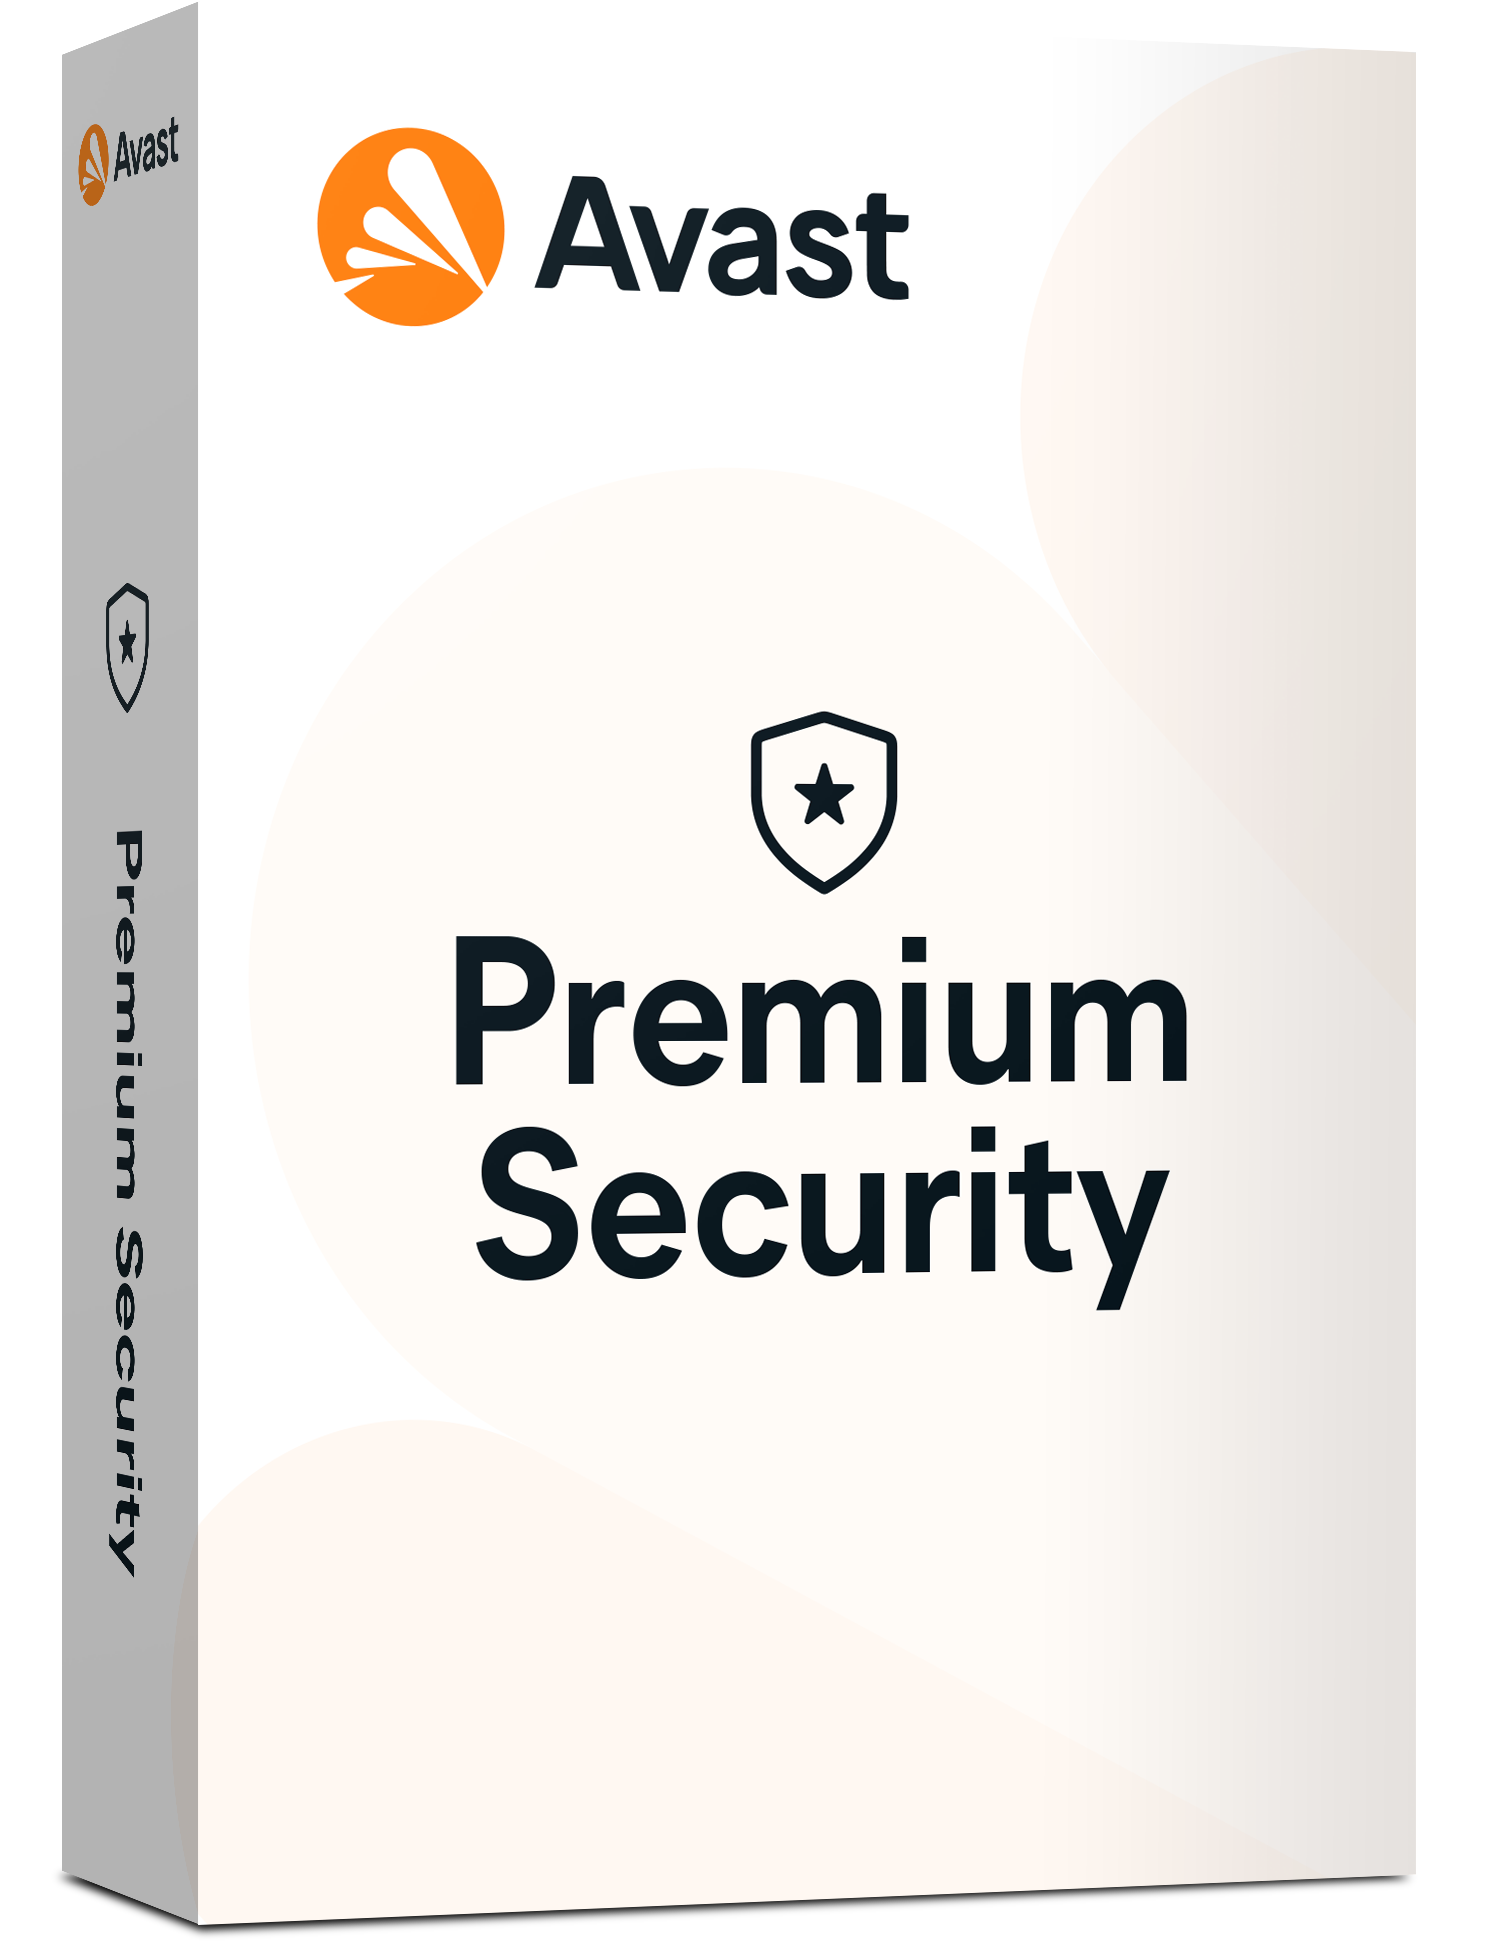 Avast_Premium_Security_W_3D_Simplified_Box_right